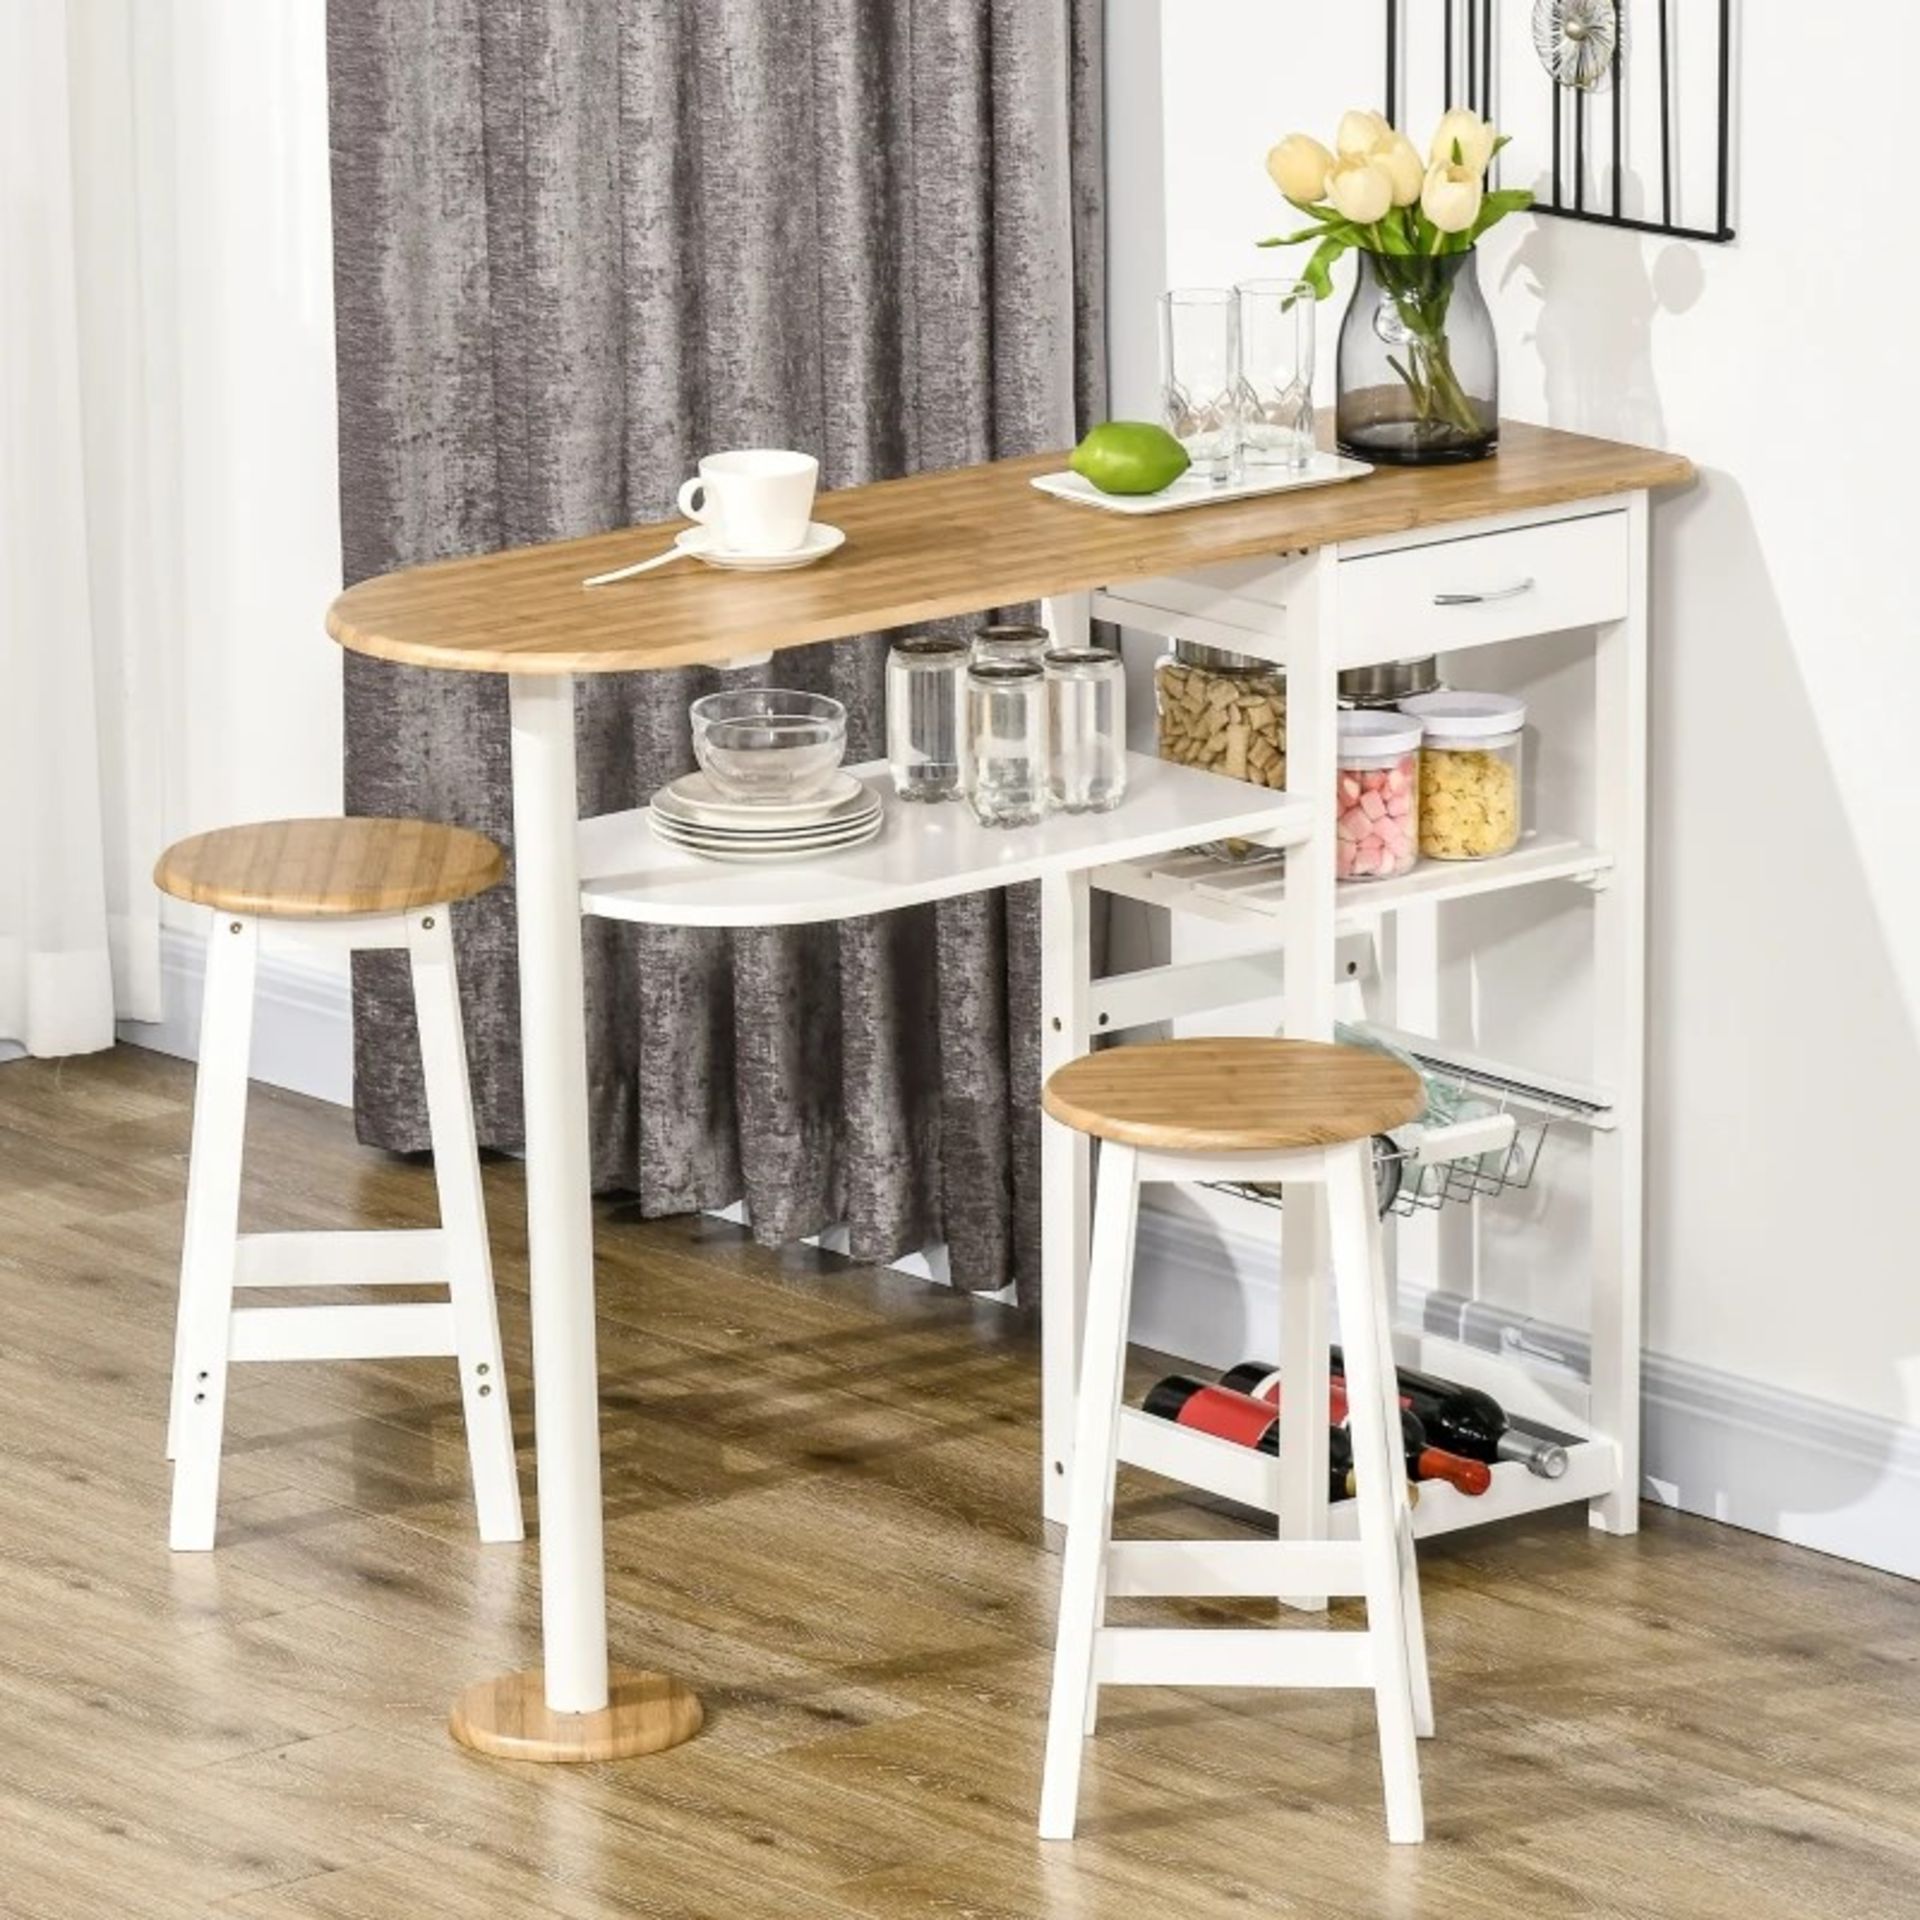 RRP £159.99 - 3 Piece Bar Table Set, Breakfast Bar table and Stools with Storage Shelf, Drawer, Wire